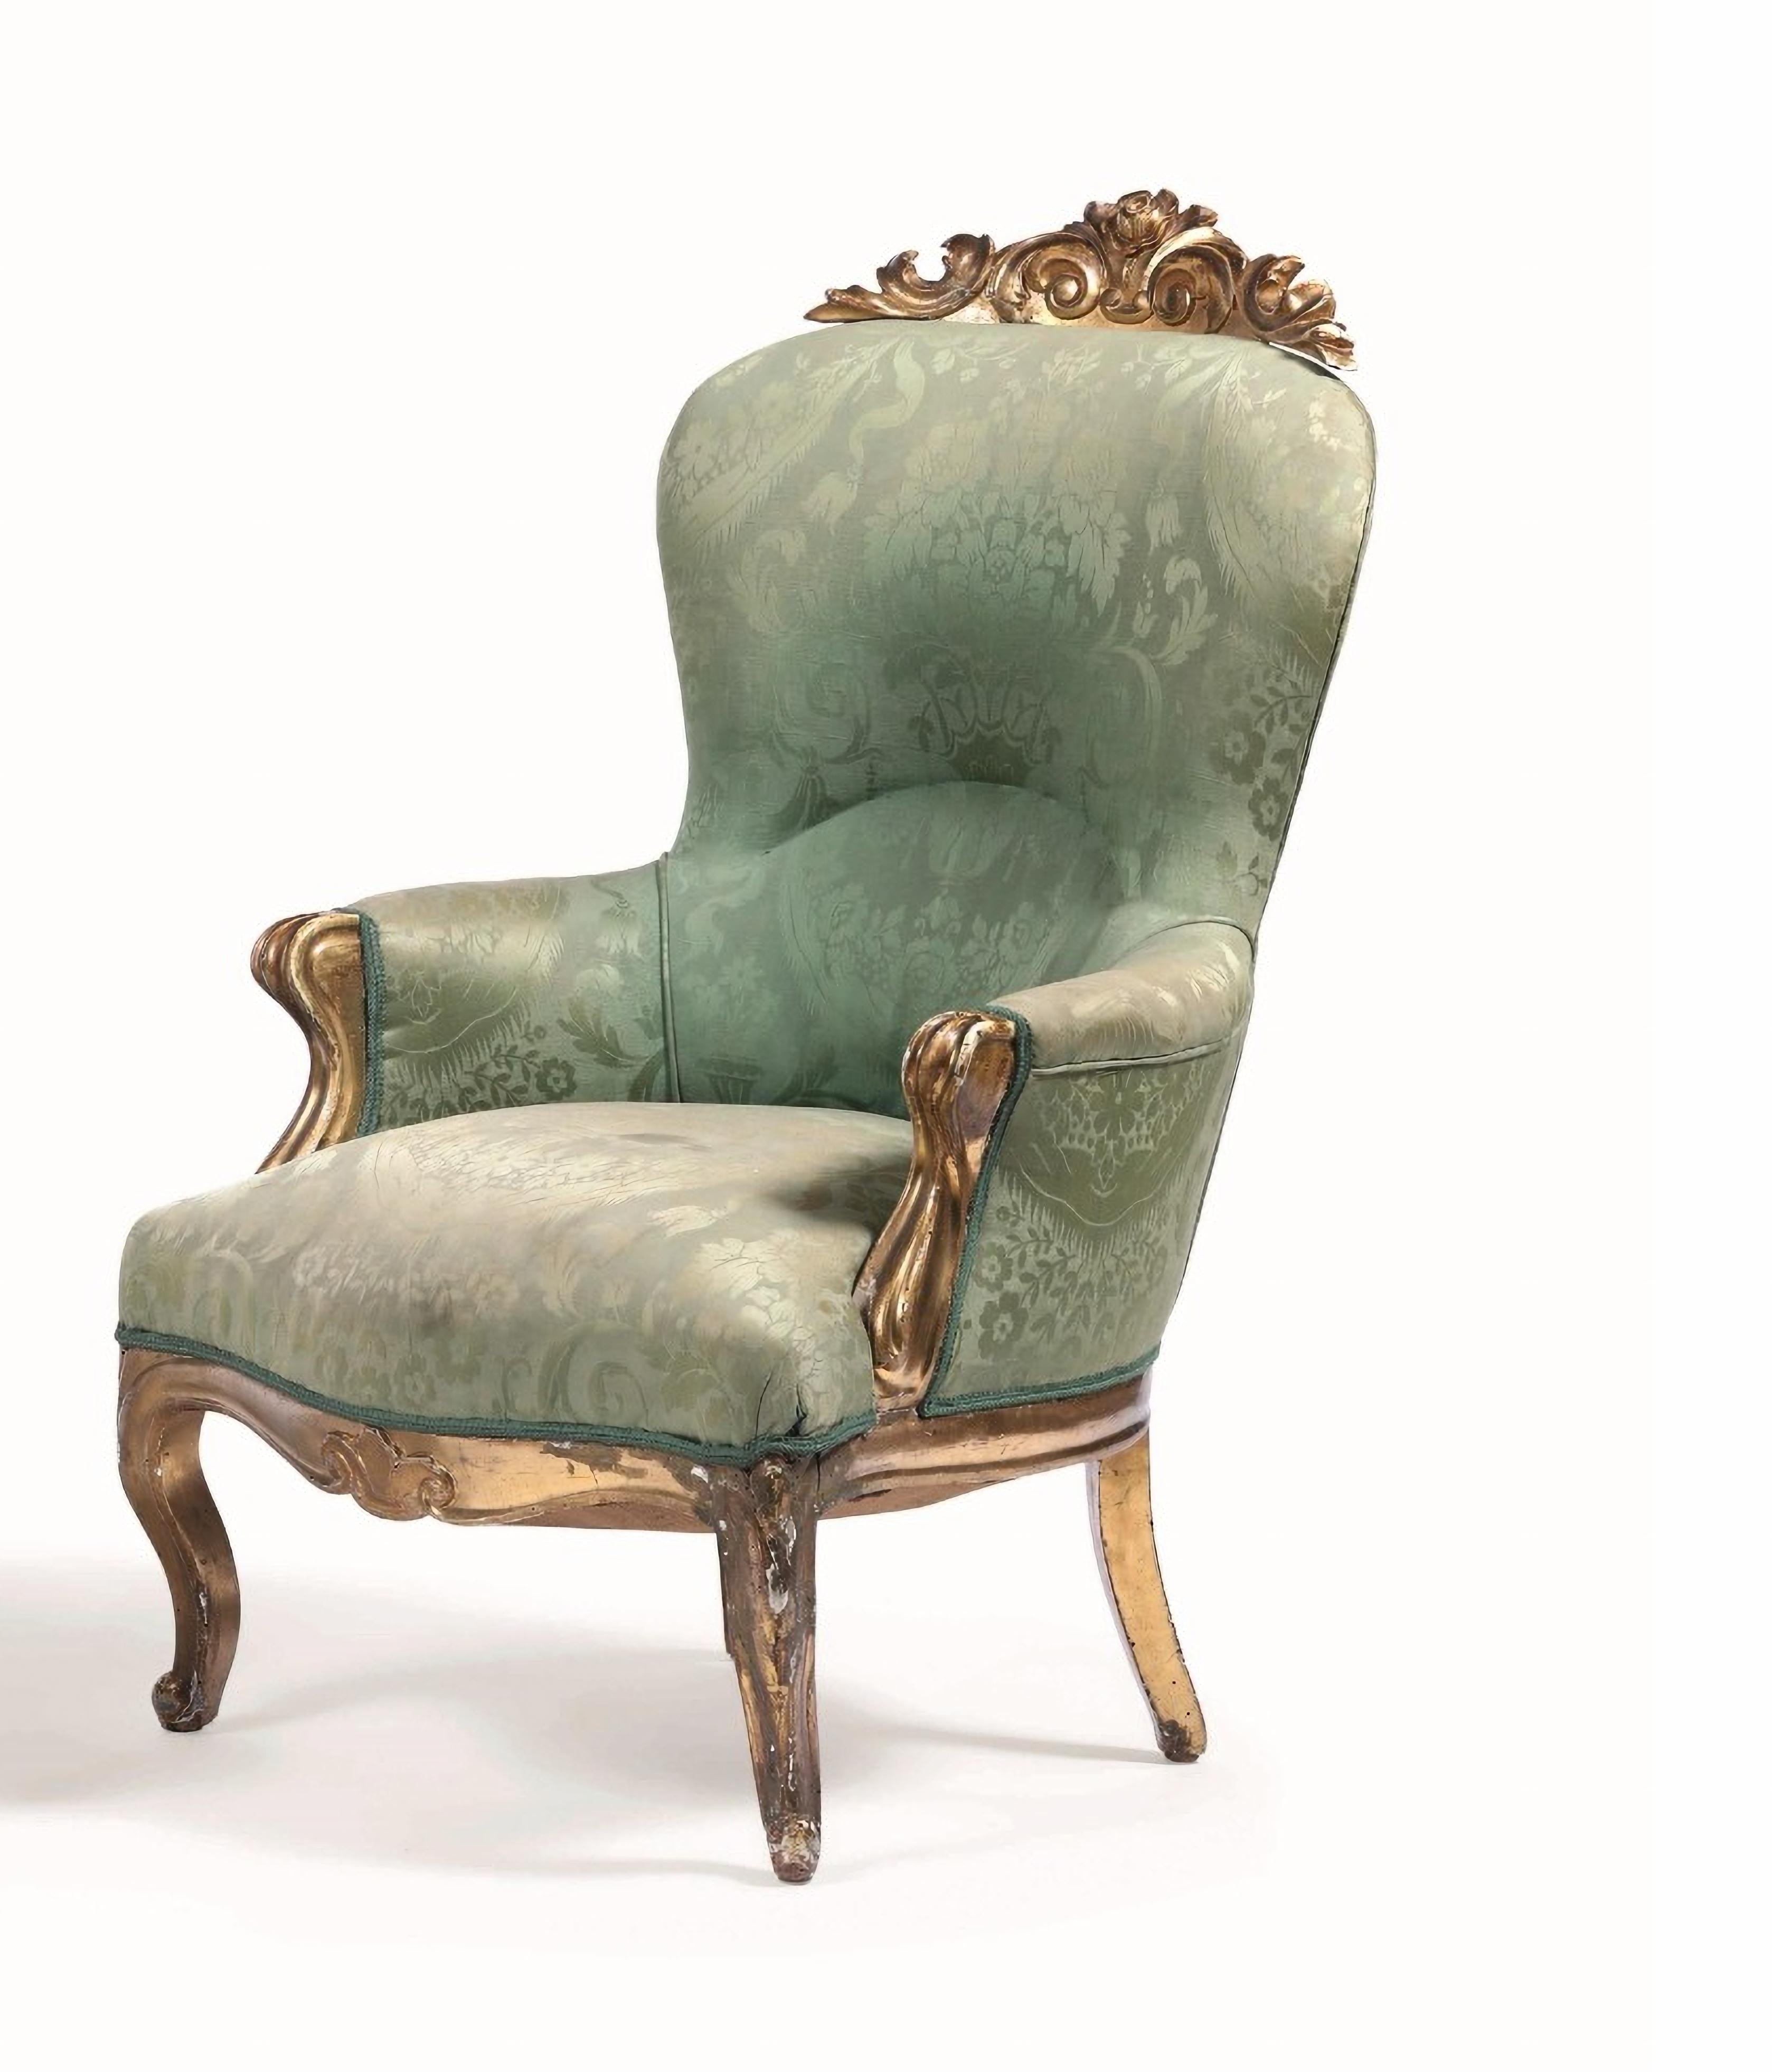 Baroque Pair of Italian Armchairs in Carved and Gilded Wood 19th Century For Sale